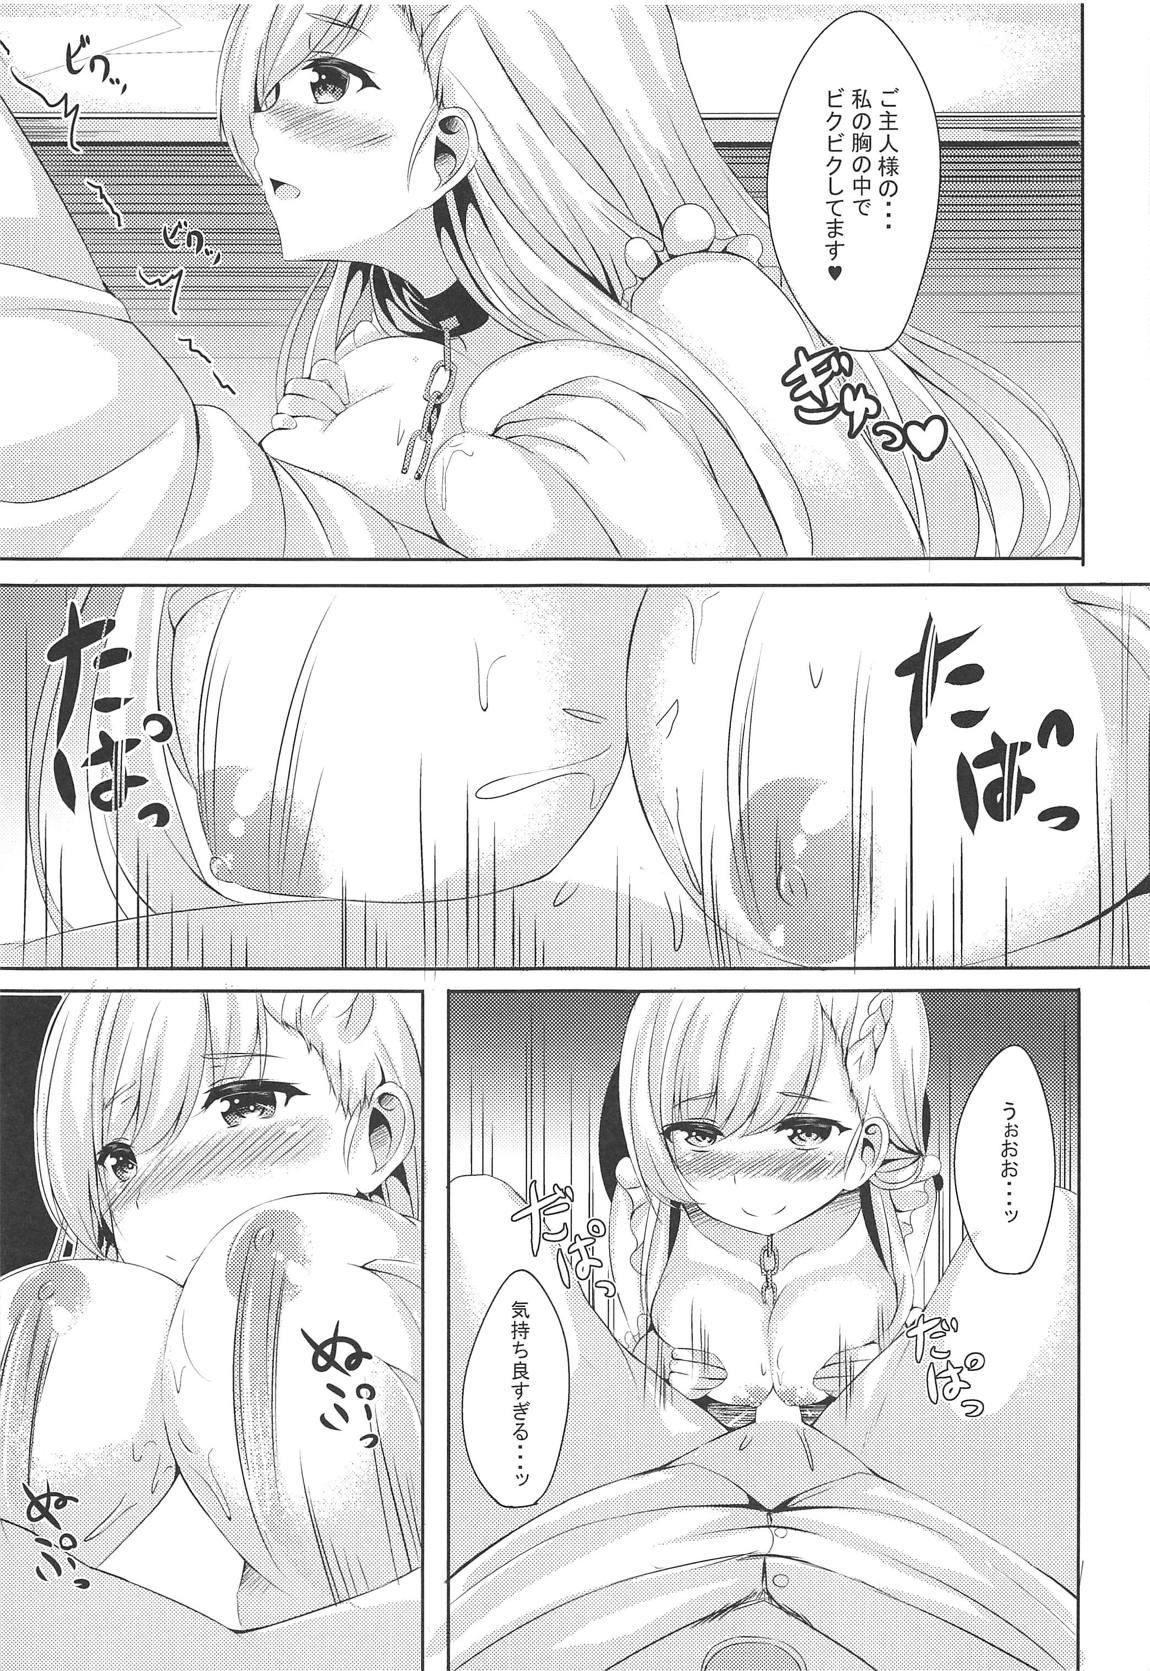 Dirty ring the bell - Azur lane Tesao - Page 11